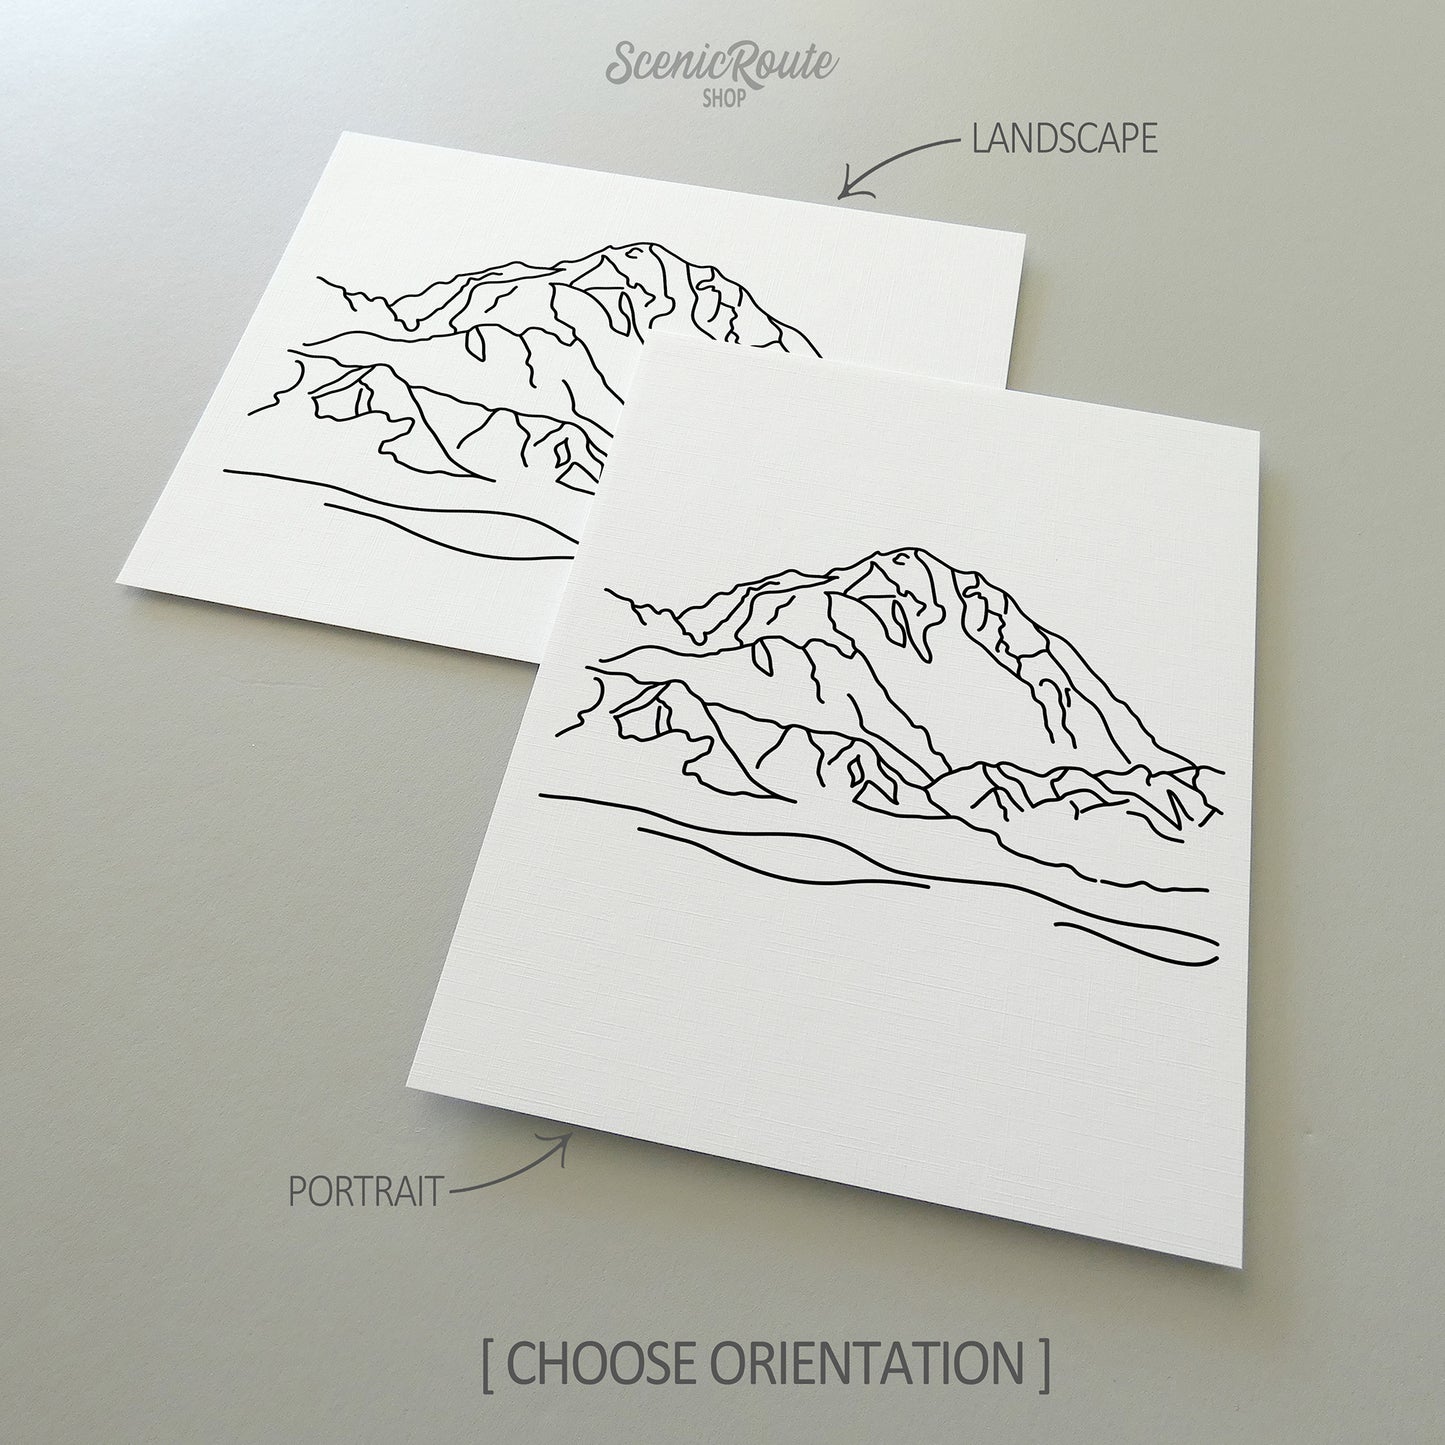 Two line art drawings of Denali National Park on white linen paper with a gray background.  The pieces are shown in portrait and landscape orientation for the available art print options.